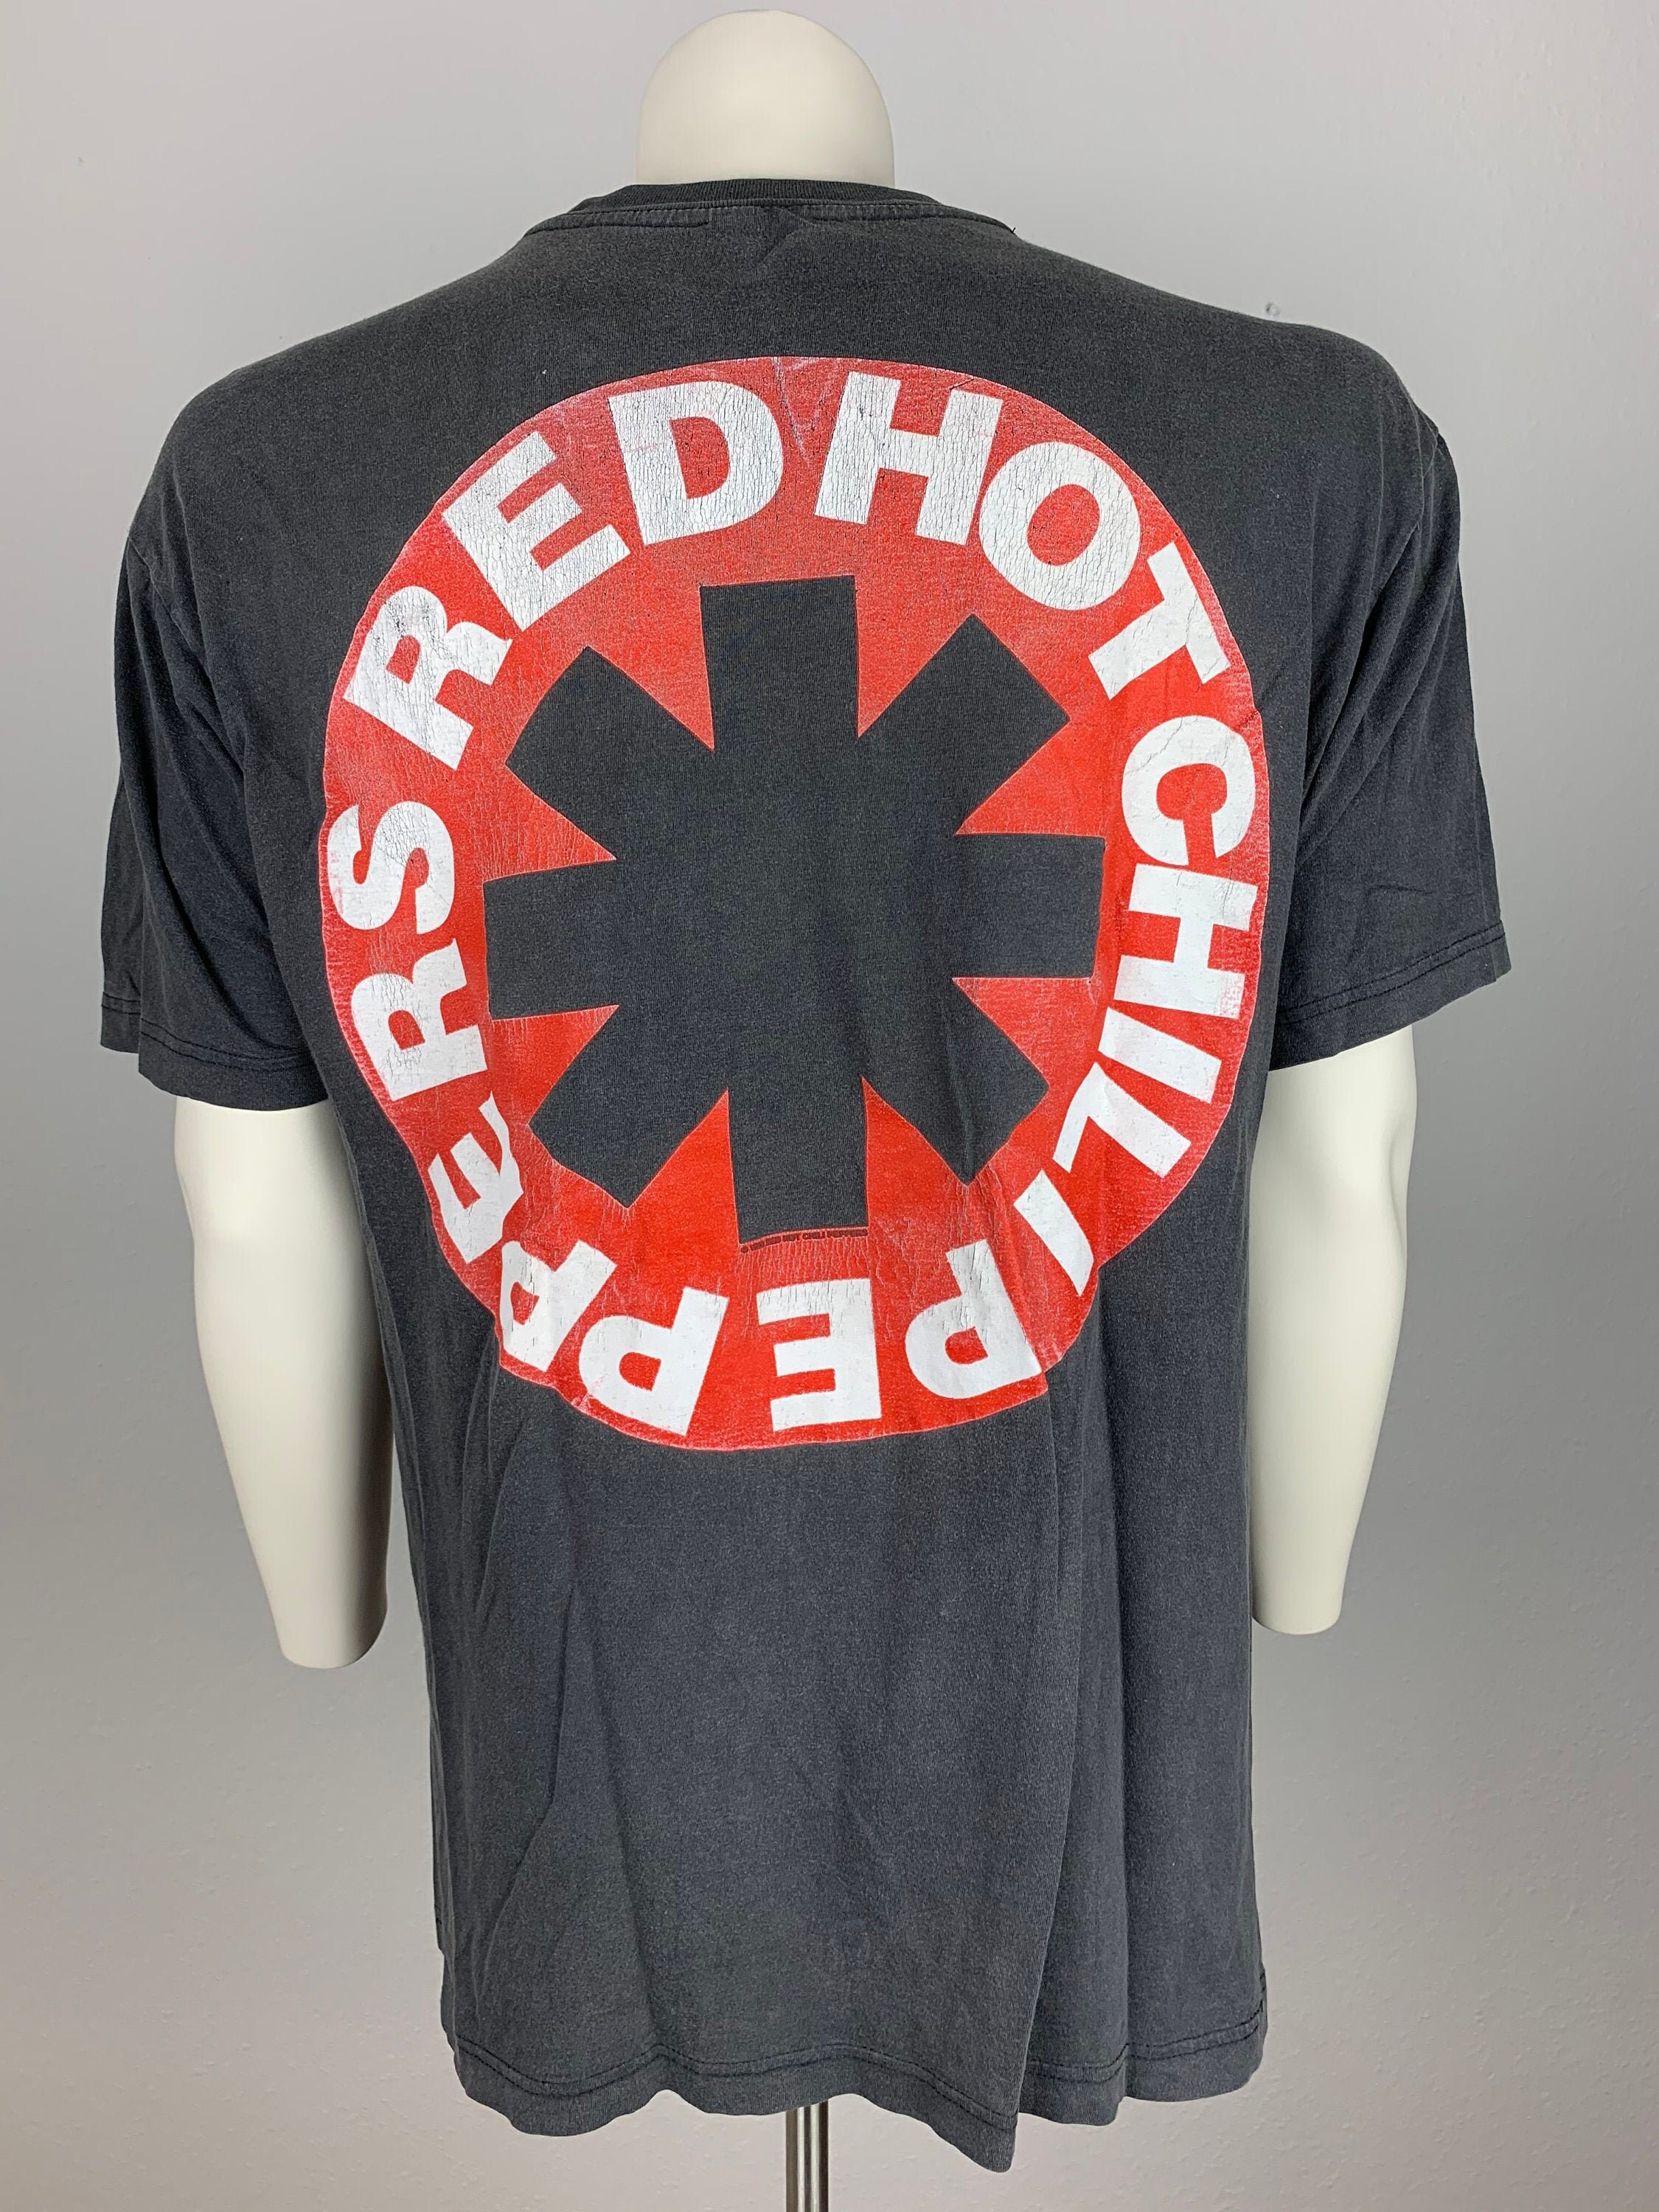 Red Hot Chili Peppers 1991 T-shirt Vintage / Giant - Etsy Israel